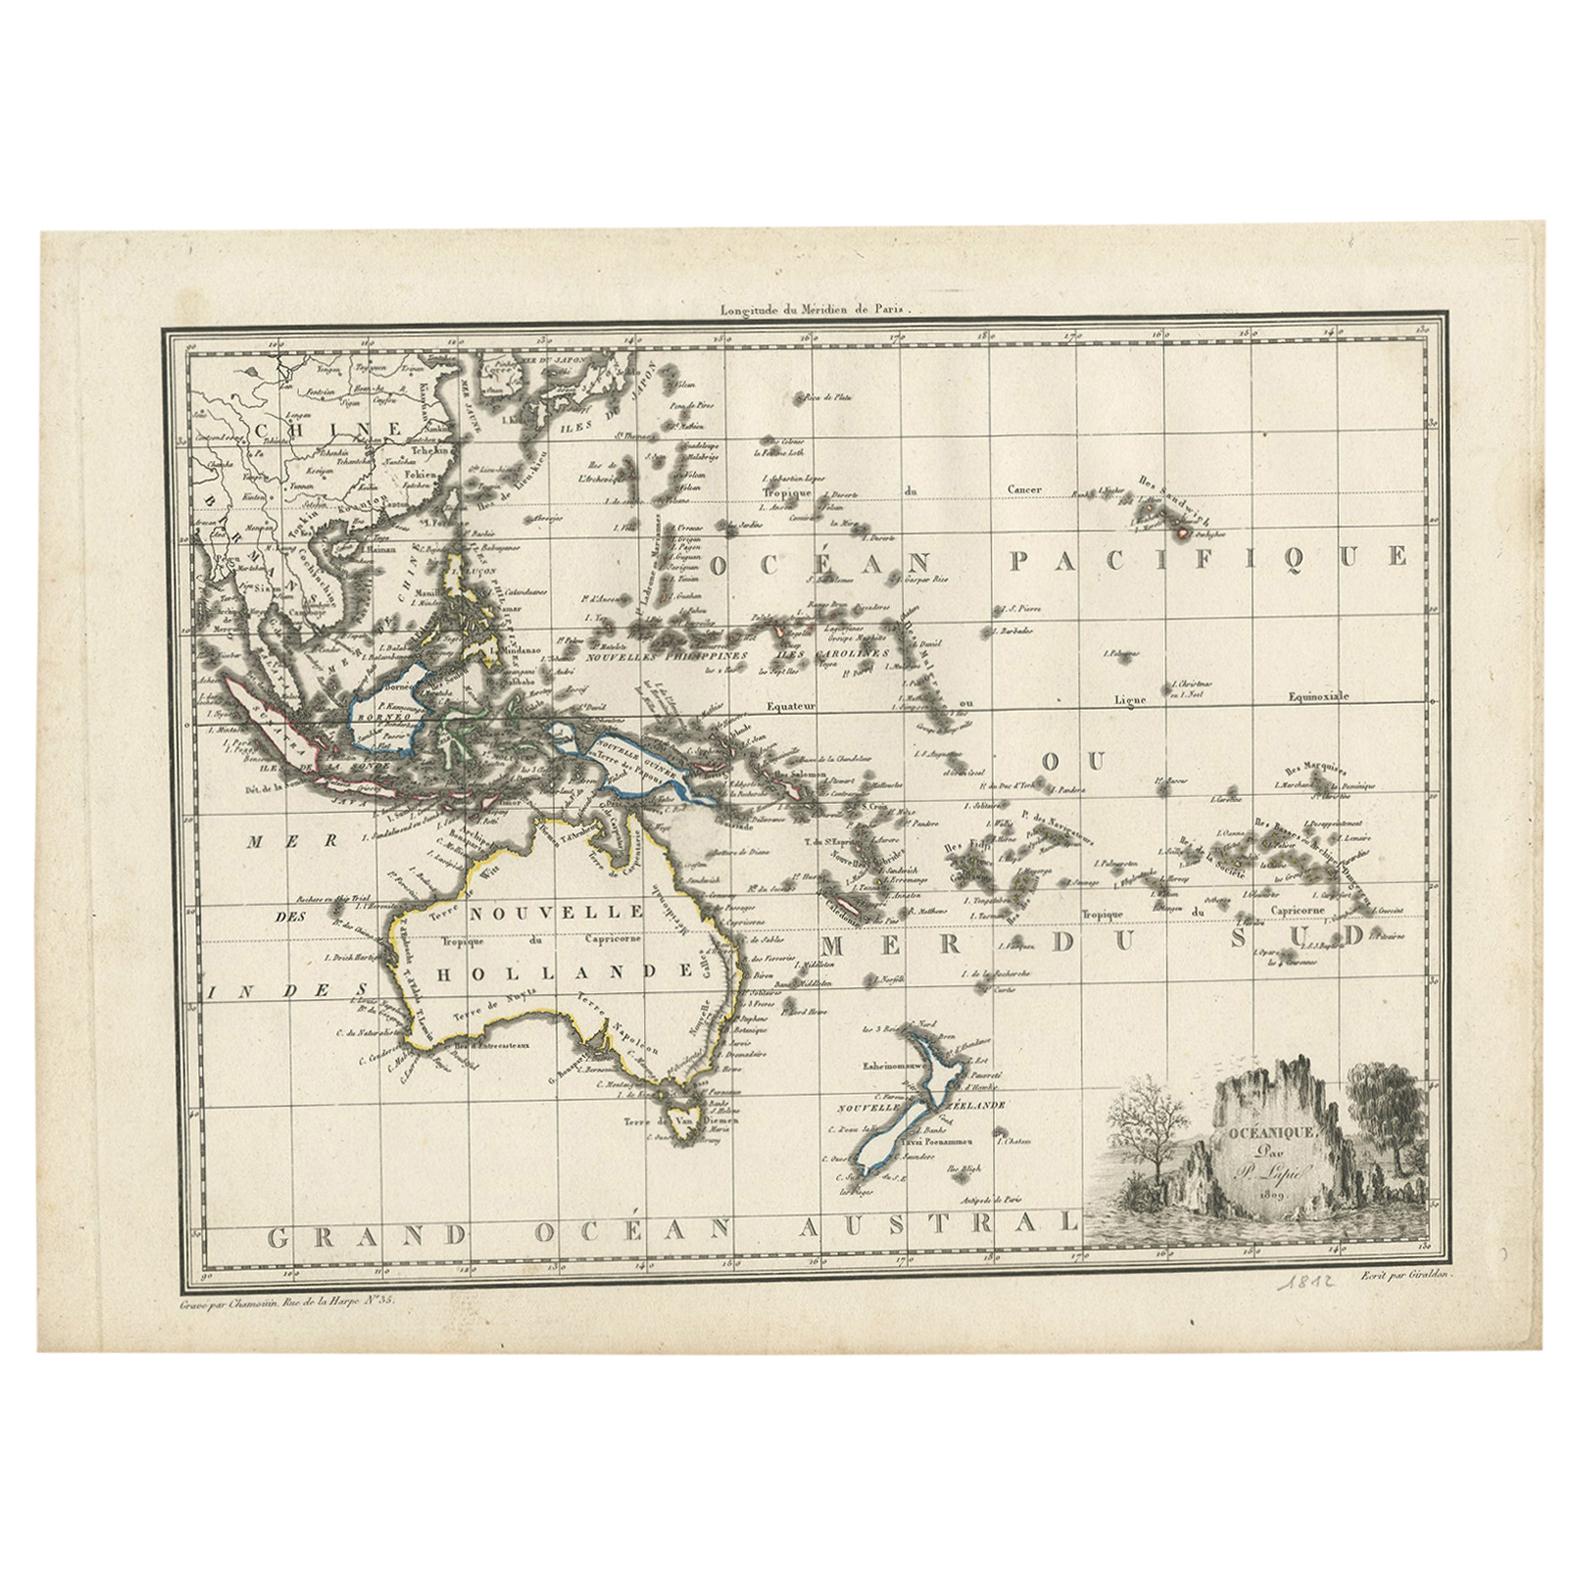 Antique Map of Oceania by Malte-Brun, 1812